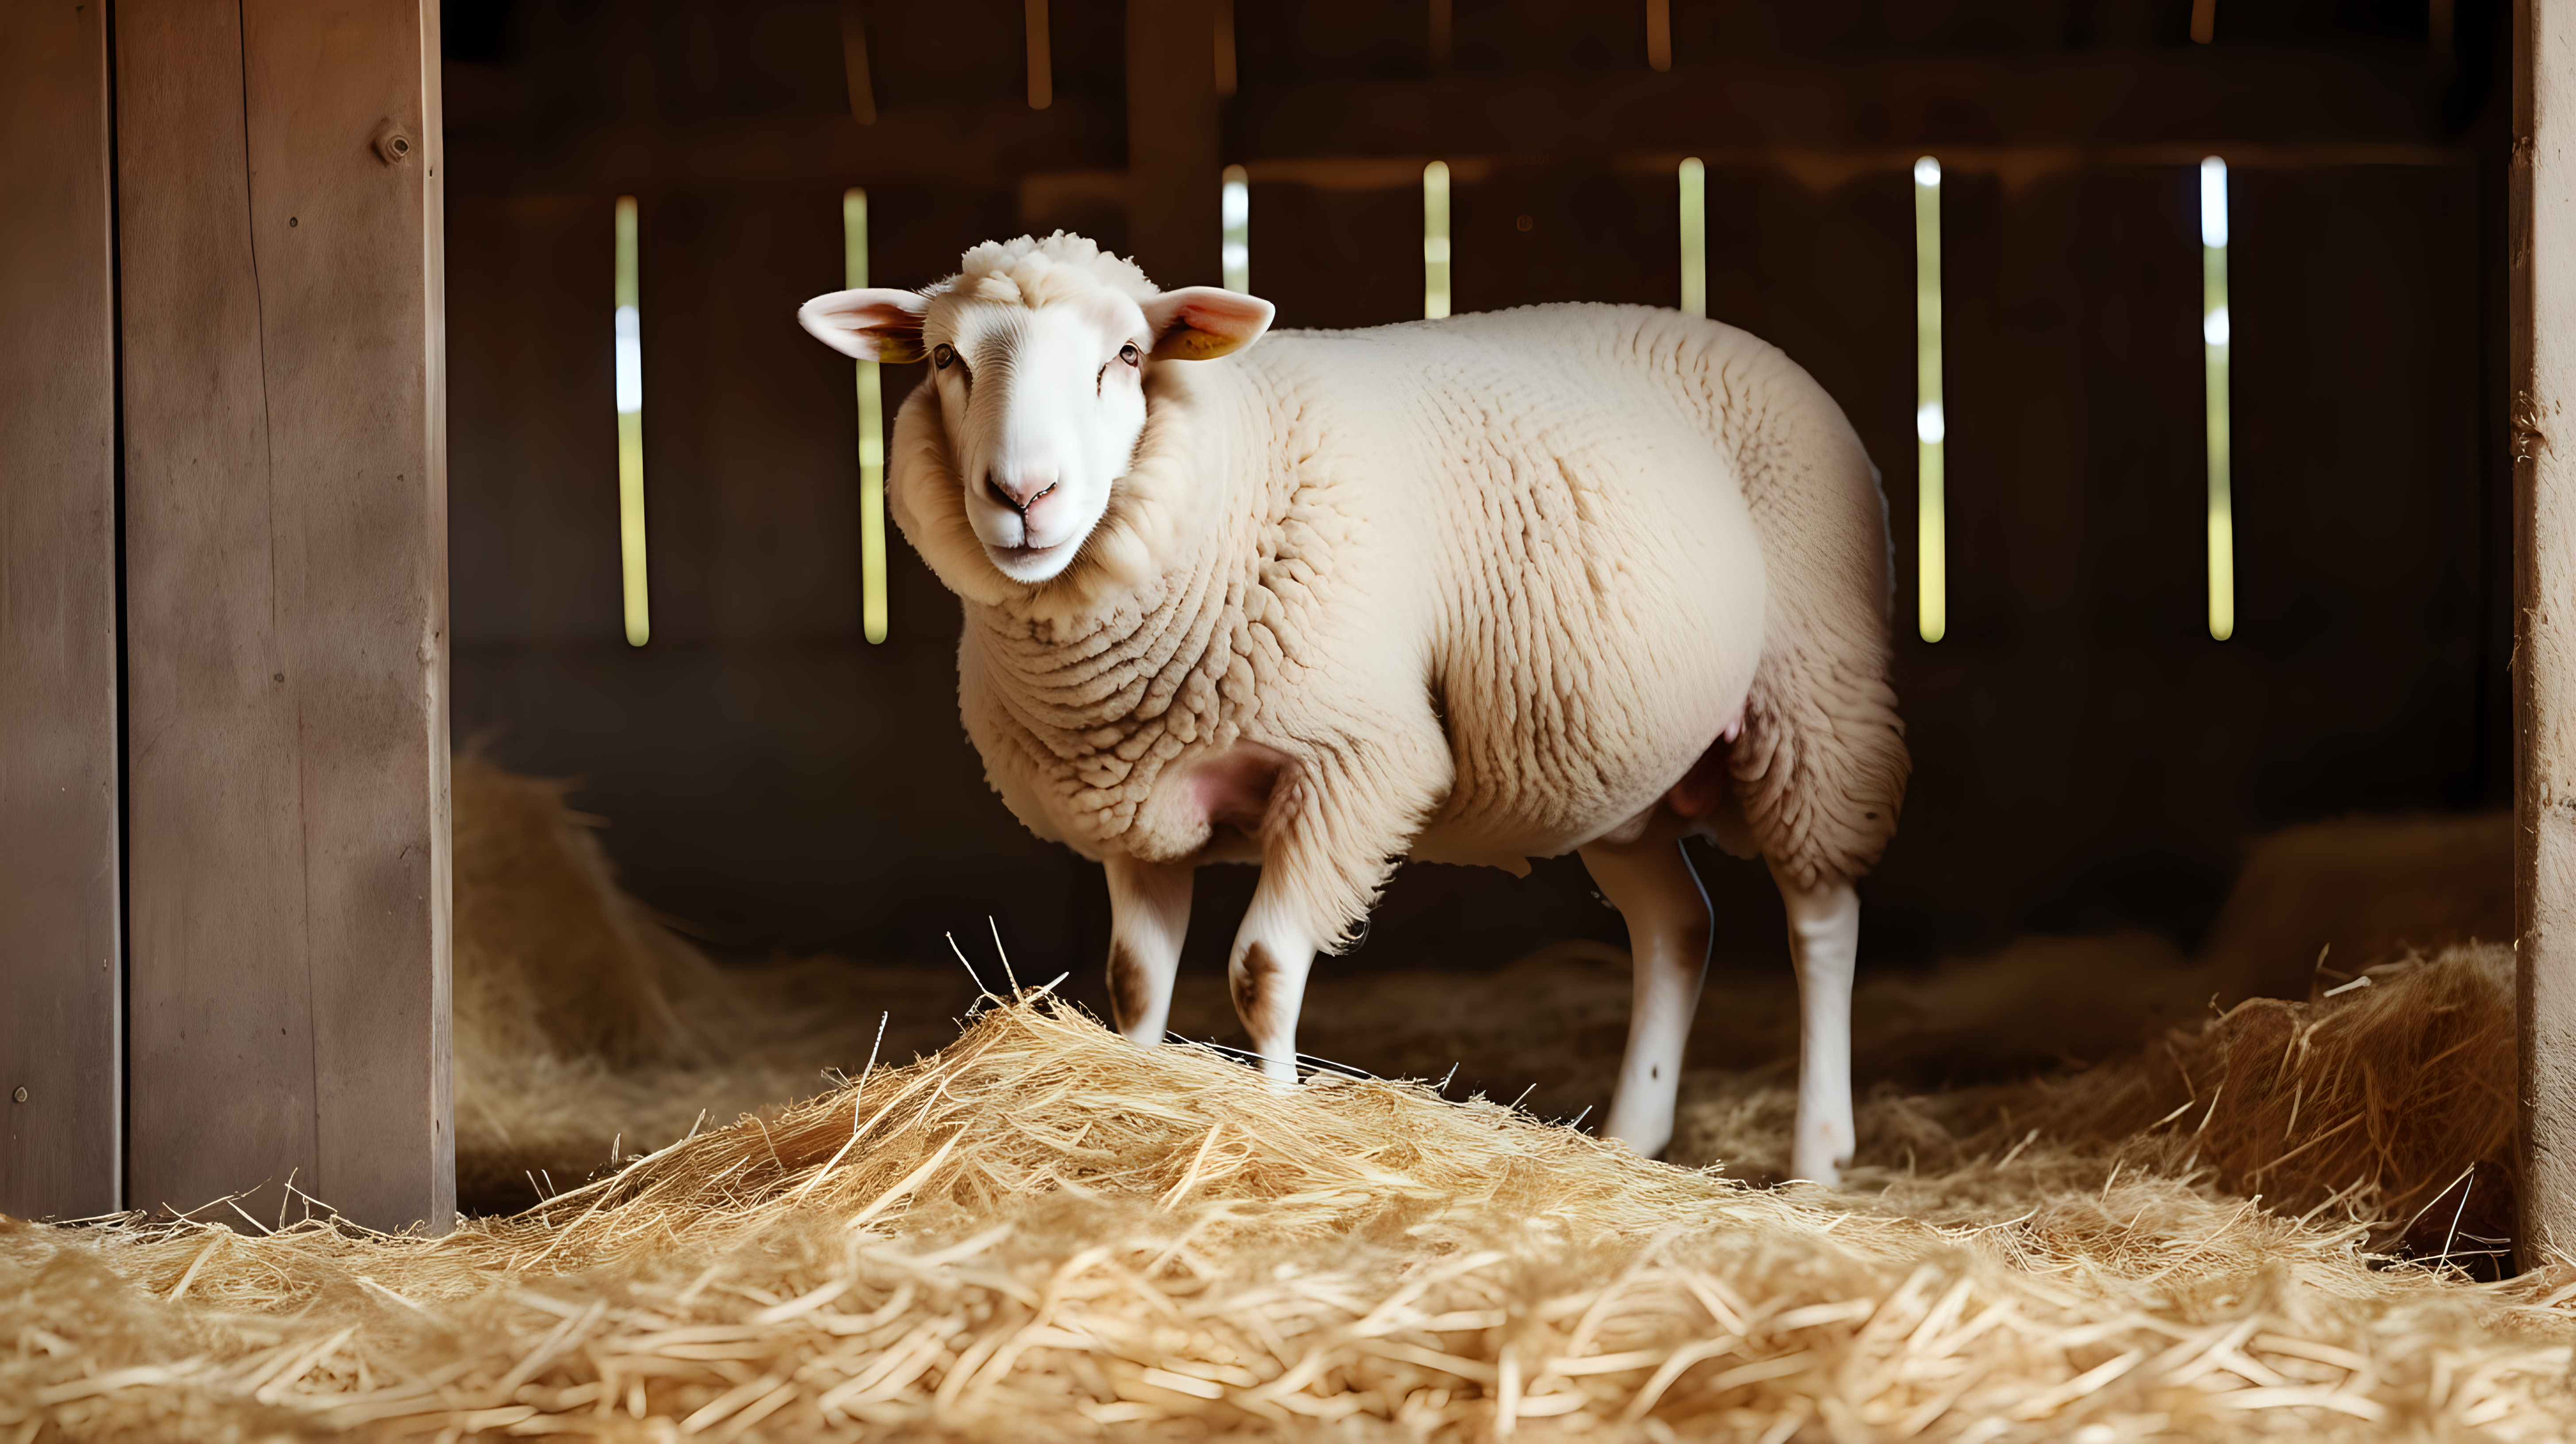 sheep eating hay in stable farm barn isolated